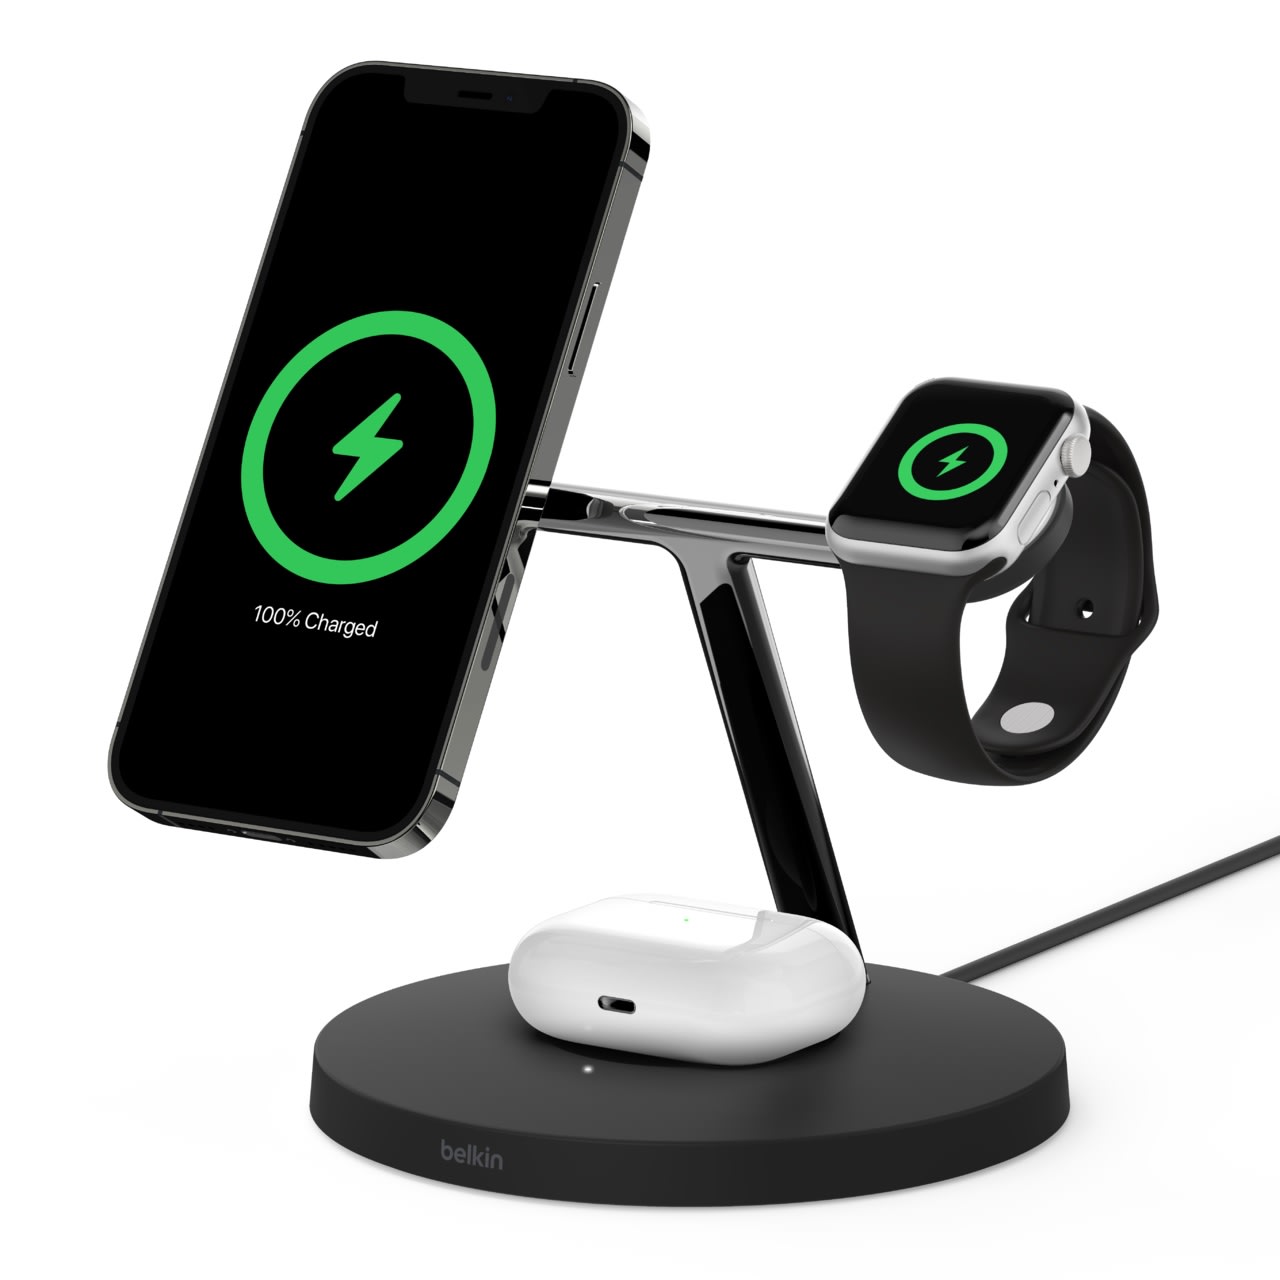 Belkin WIZ009 BoostCharge Pro 3-in-1 Wireless Charger with MagSafe